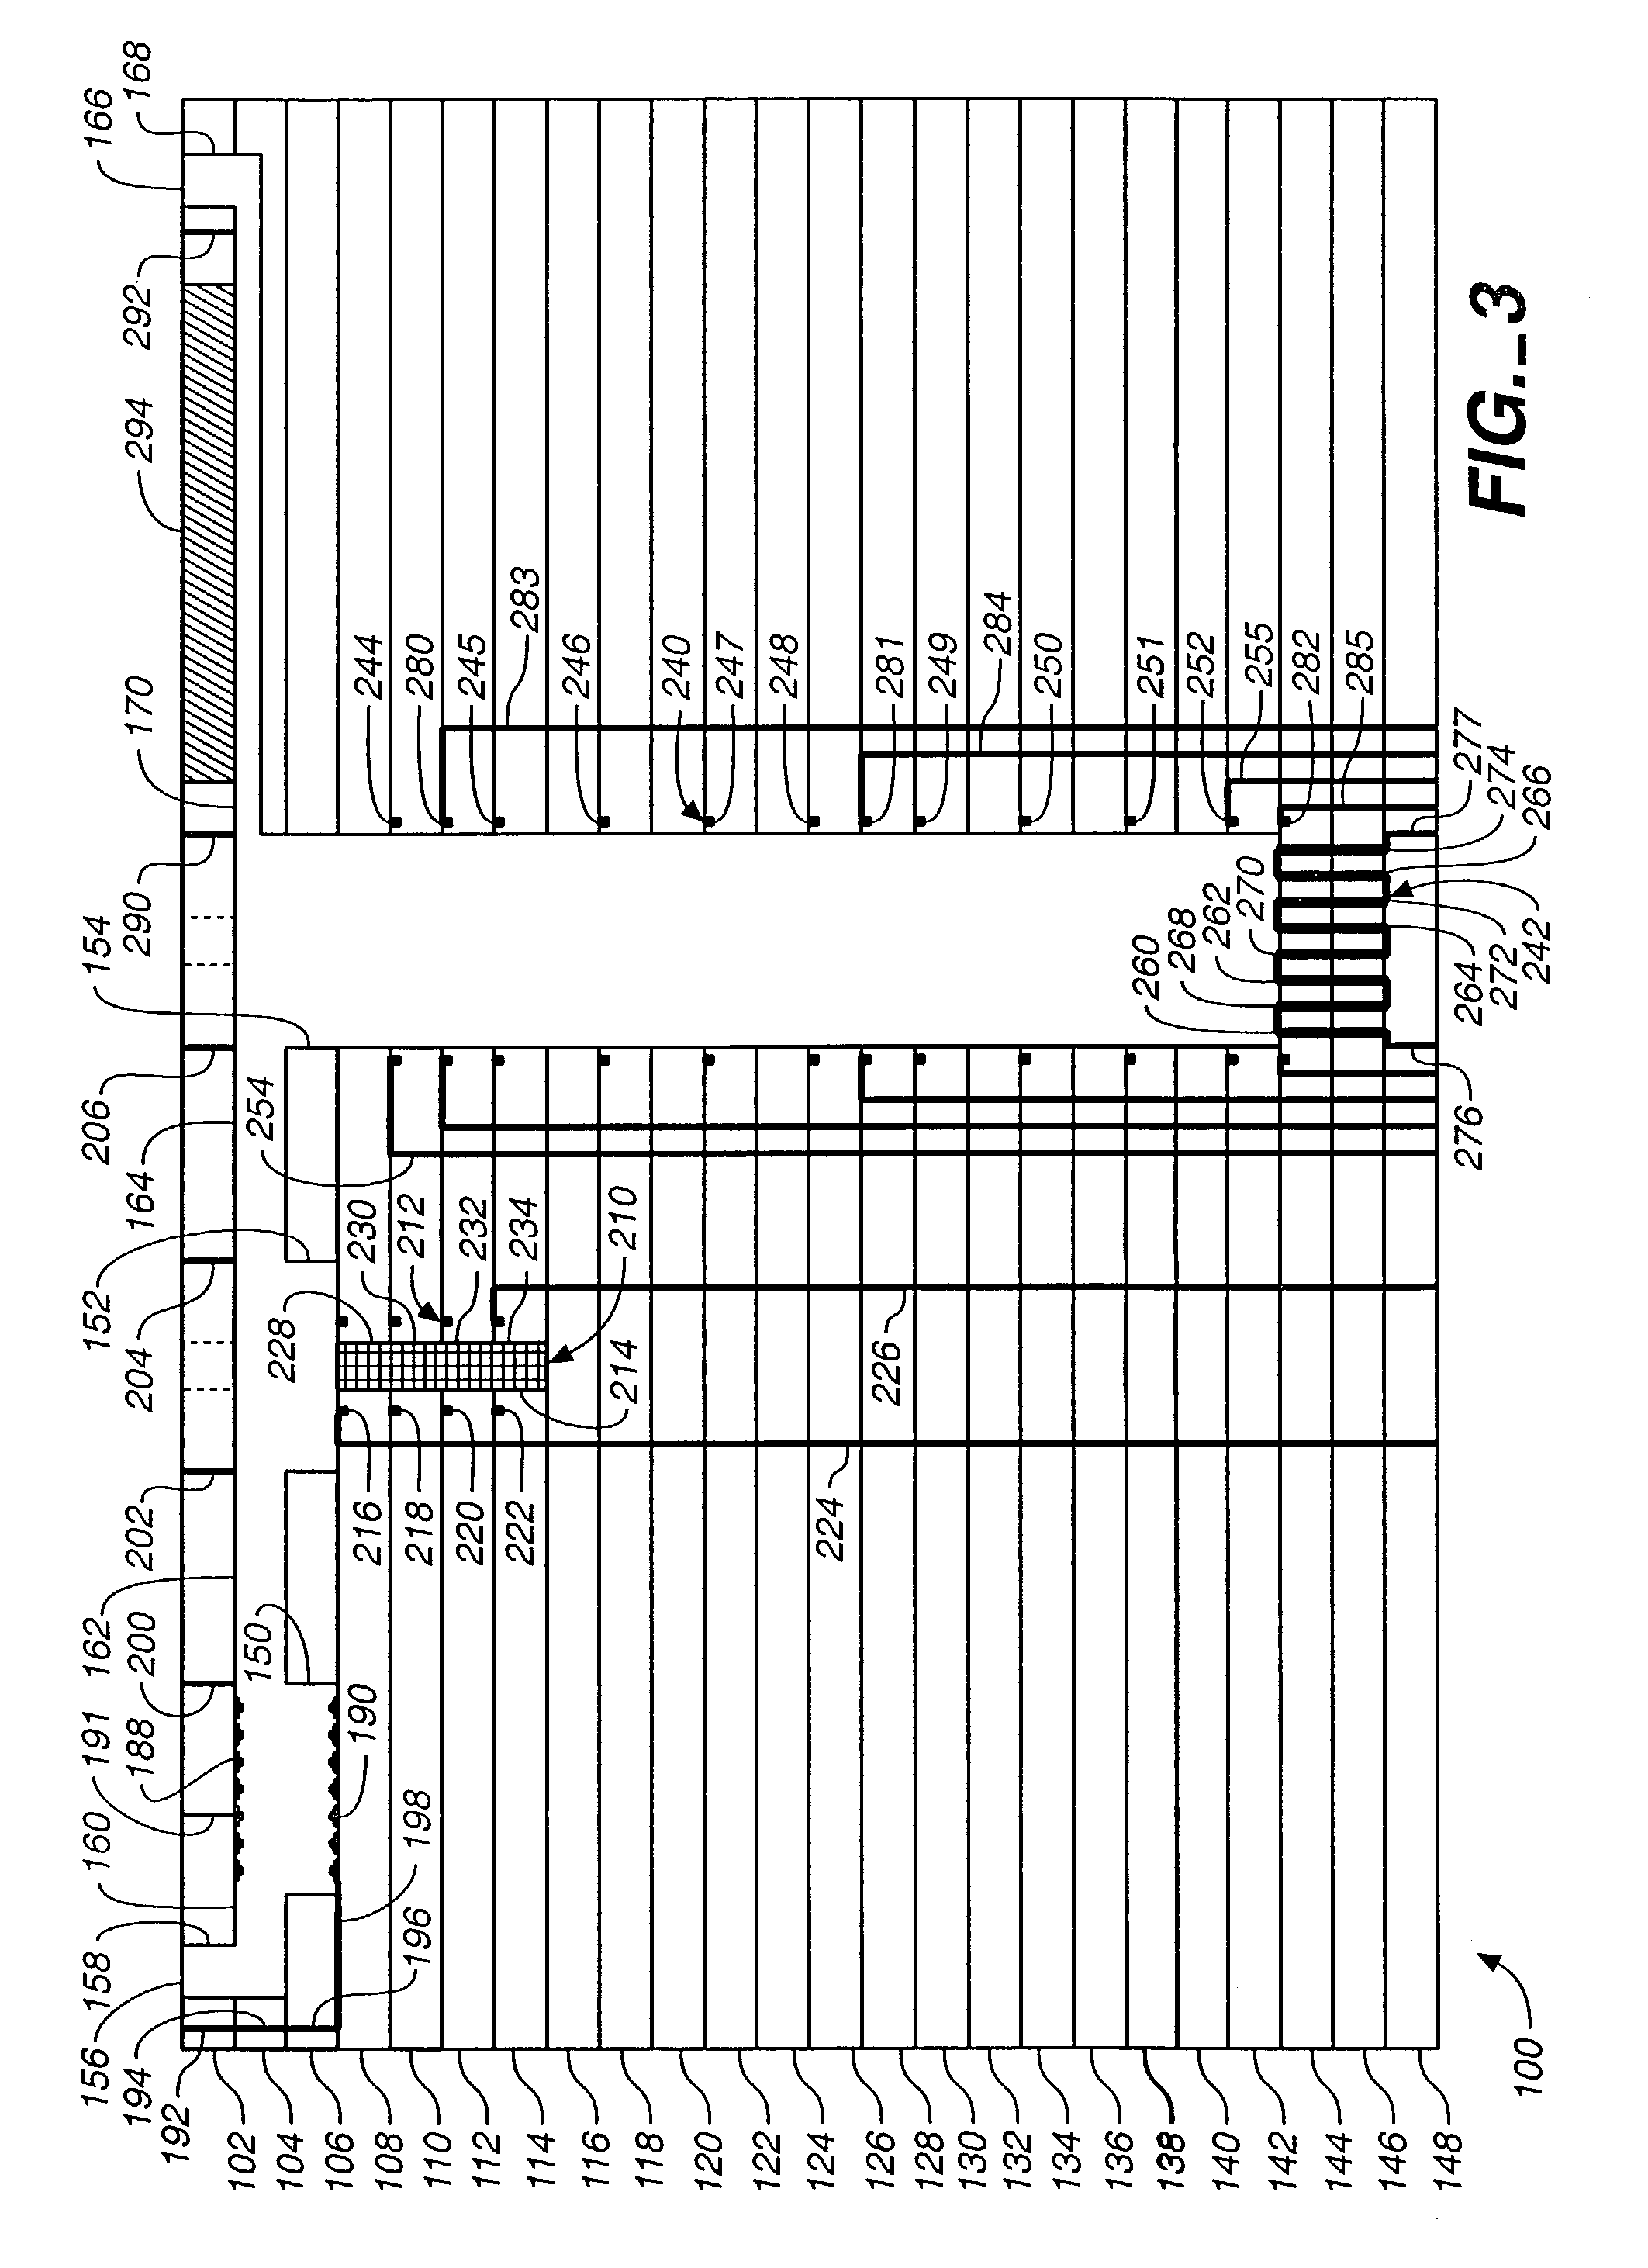 Multilayered microfluidic DNA analysis system and method